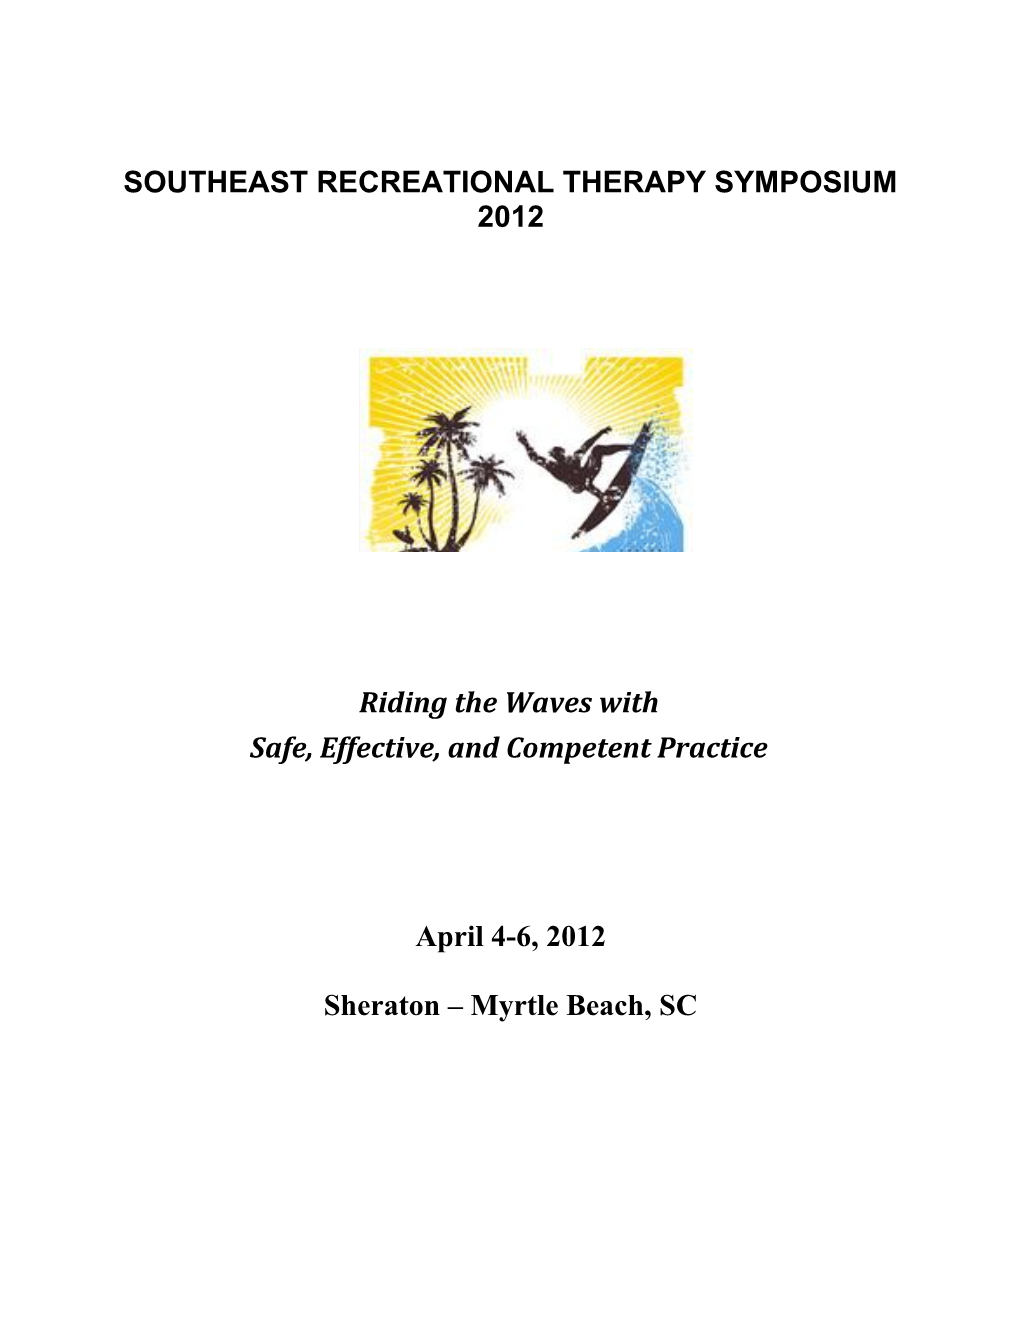 Southeast Recreational Therapy Symposium2012